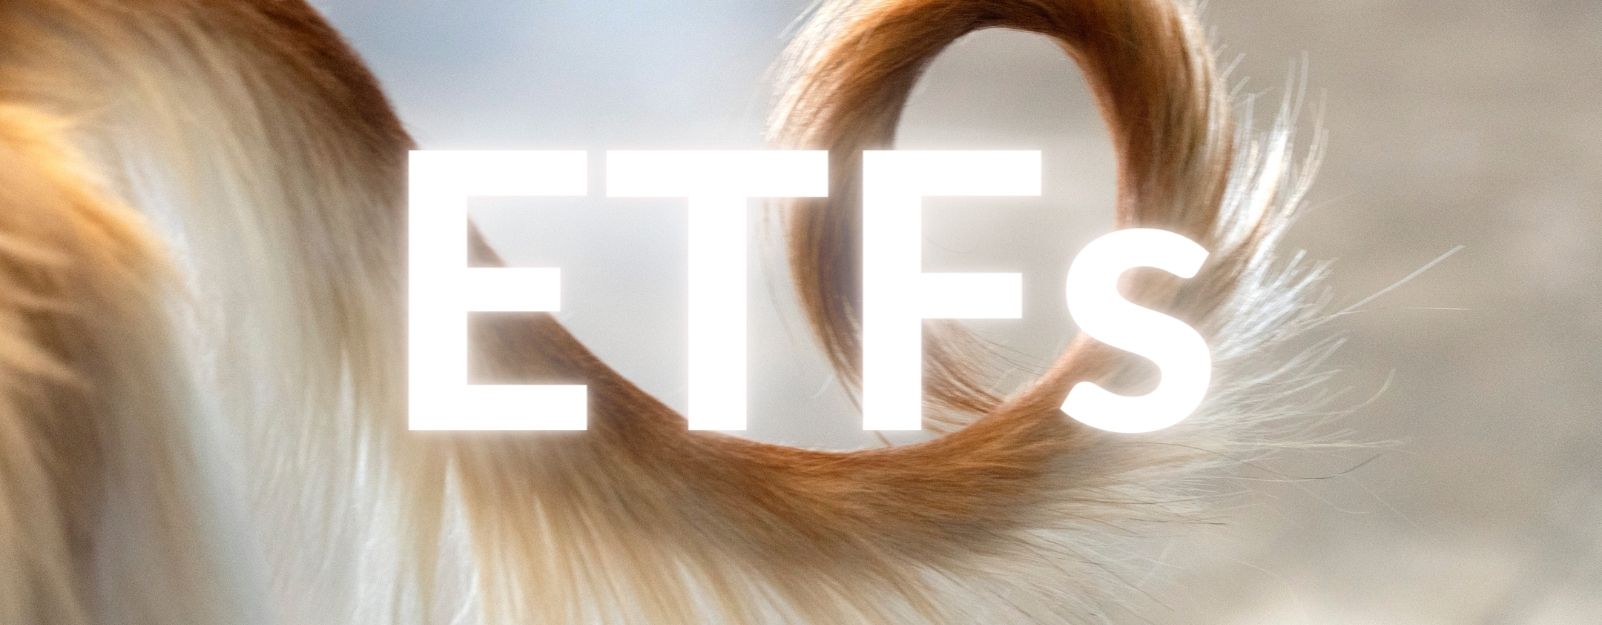 ETFs - The Tail That Wags The Dog